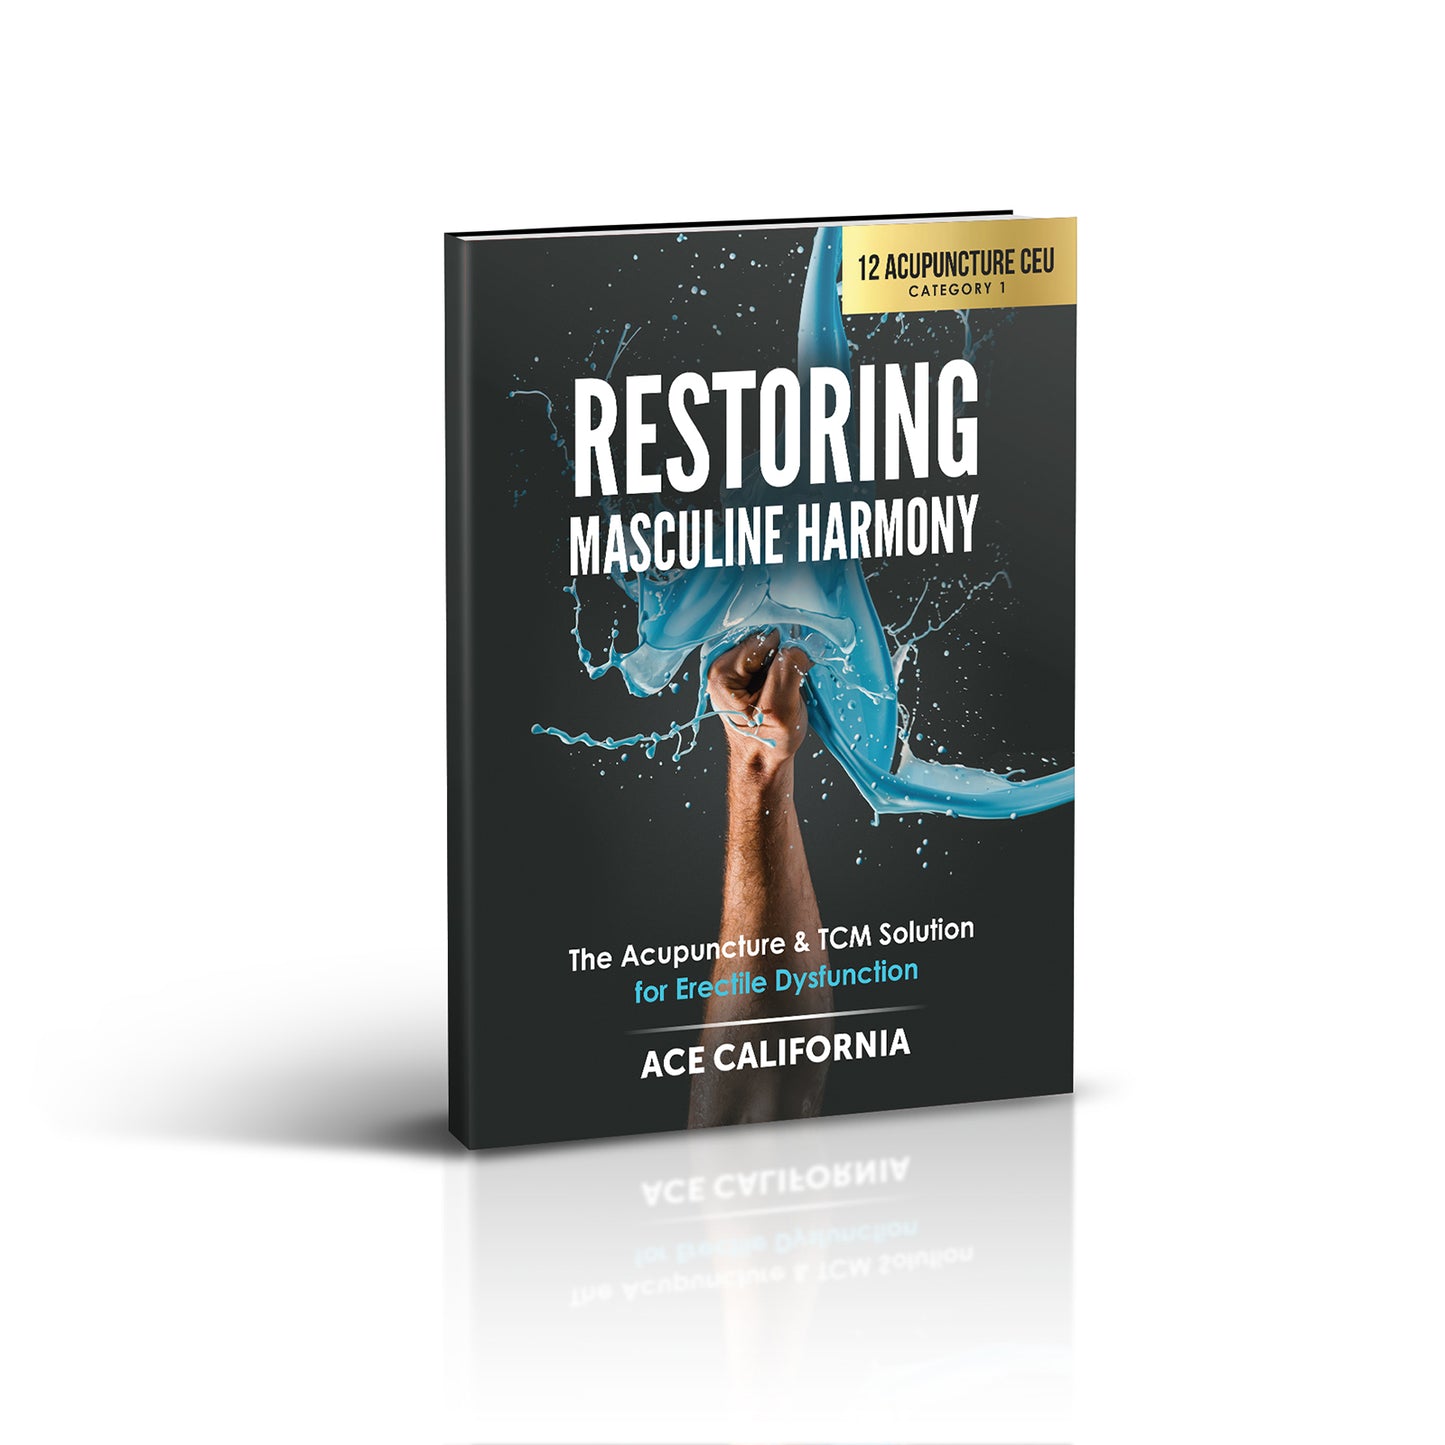 Restoring Masculine Harmony: The Acupuncture & TCM Guide for Erectile Dysfunction Paperback - California Continuing Education, 12 CEU ACEU Masters California Acupuncture Board NCCAOM Florida acupuncture continuing education CEU PDA